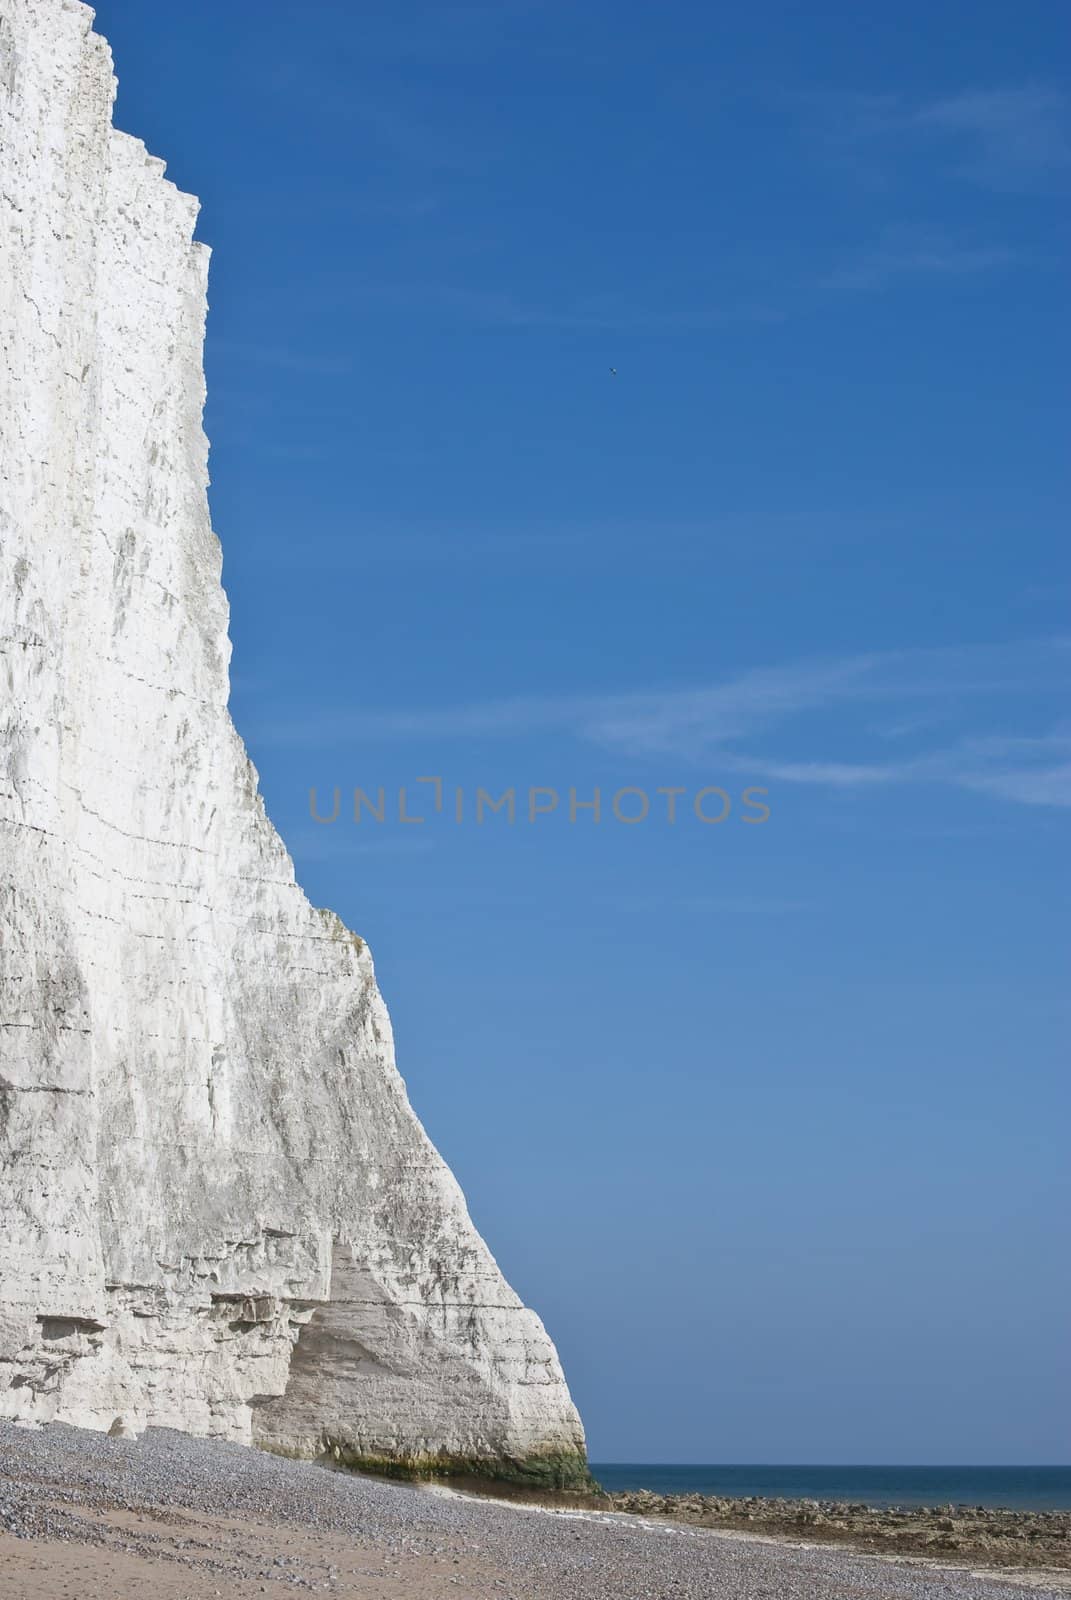 Portrait shot of a white chalk cliff at the sea's edge.  Sand, sea and blue sky visible.   Copy space.